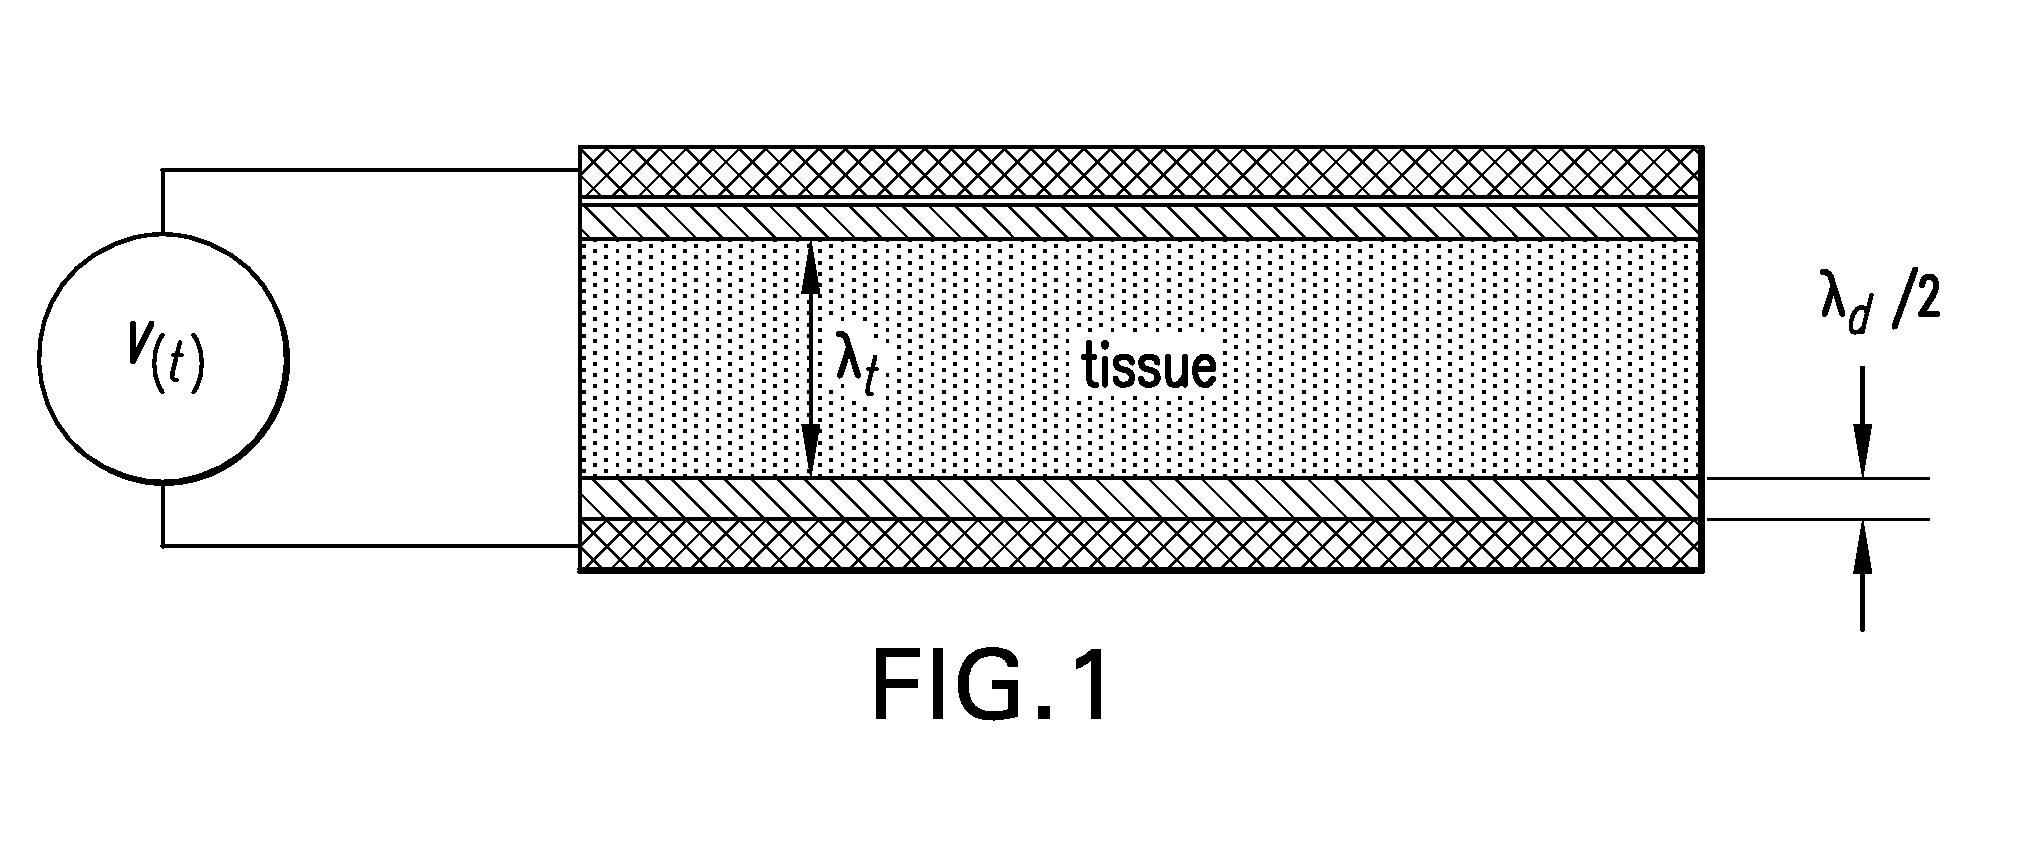 Electrode Geometries and Method for Applying Electric Field Treatment to Parts of the Body